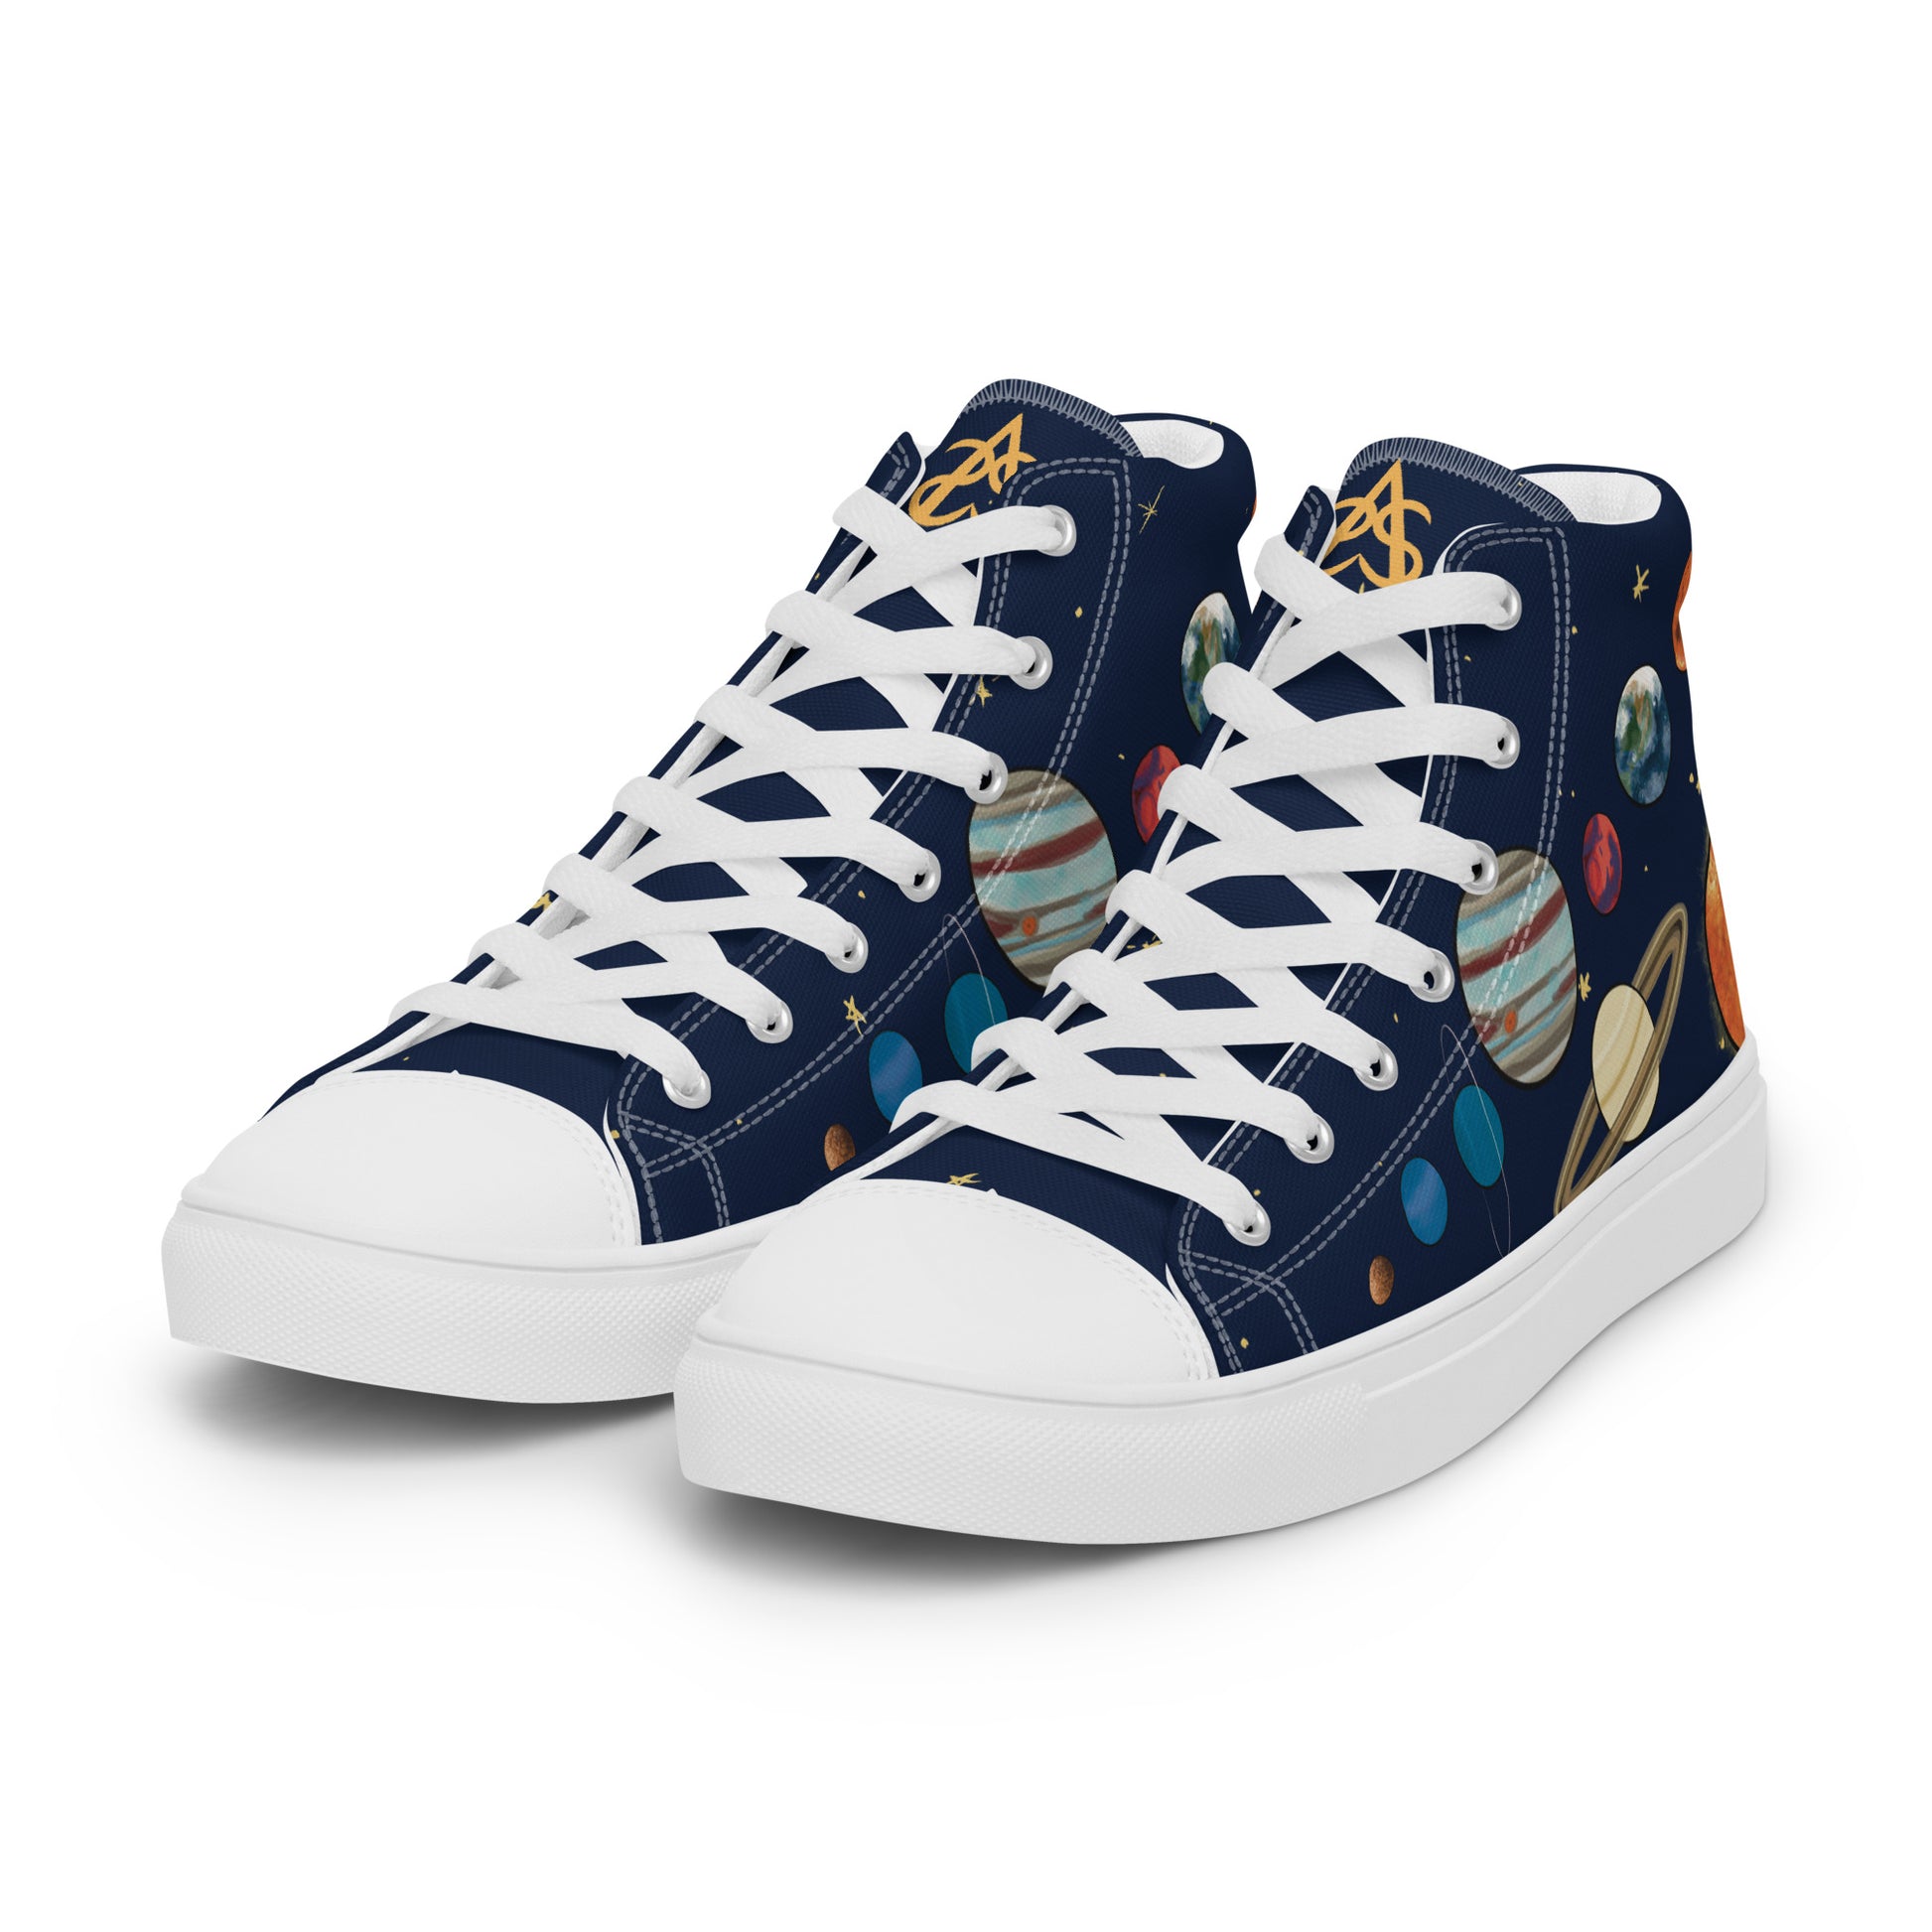 Left front view: A pair of high top shoes with painted solar system and starry background with white laces.